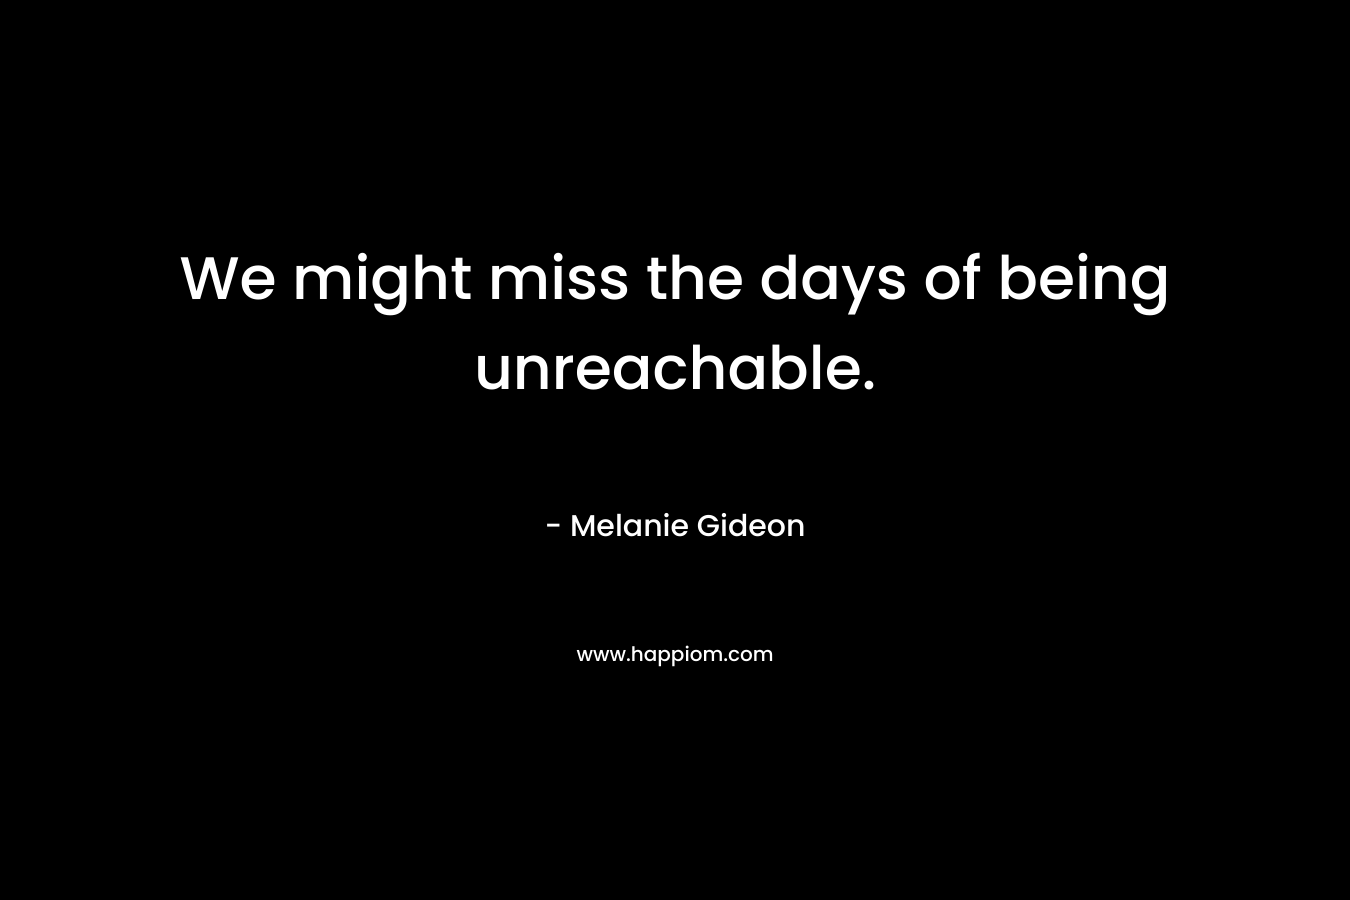 We might miss the days of being unreachable.